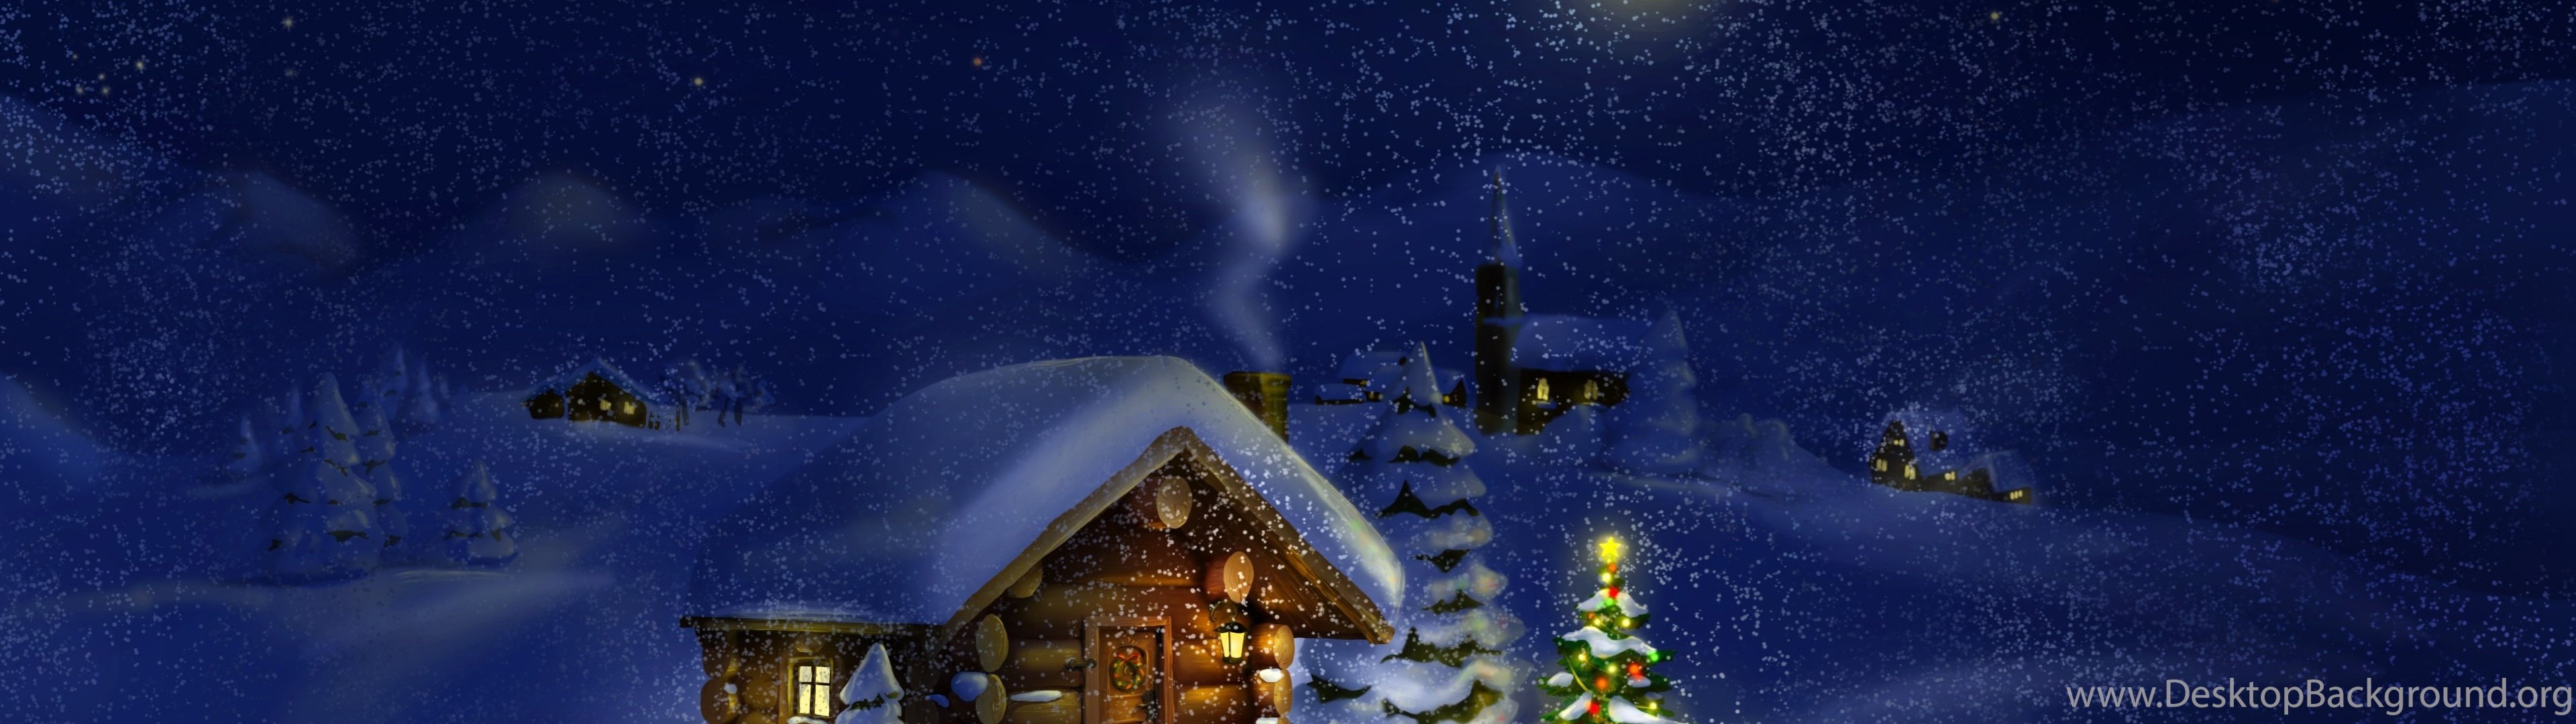 3840x1080 Christmas Dual Wallpapers Wallpaper Cave 2182